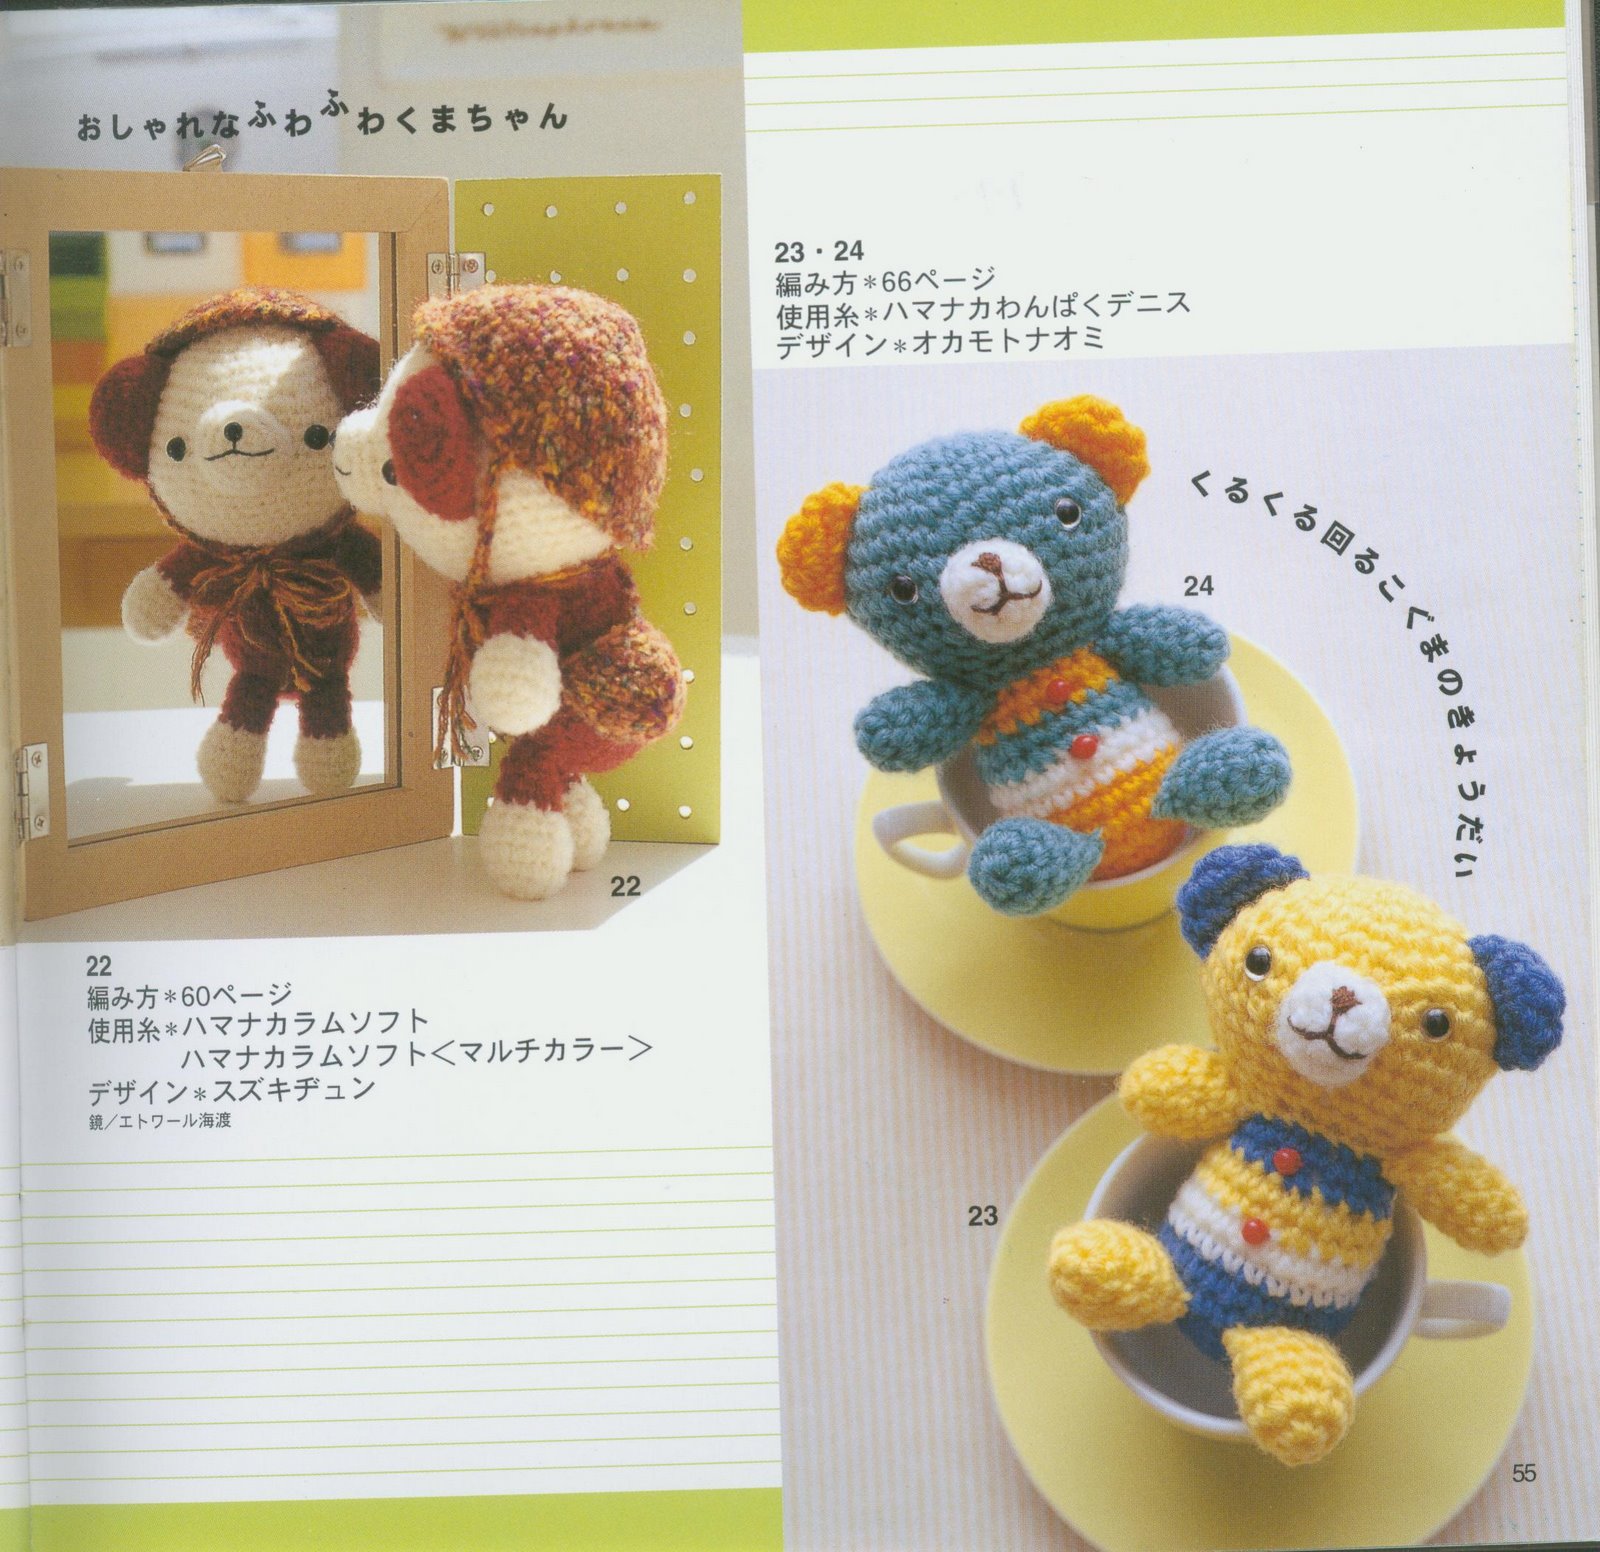 Little and colored bears amigurumi pattern (1)